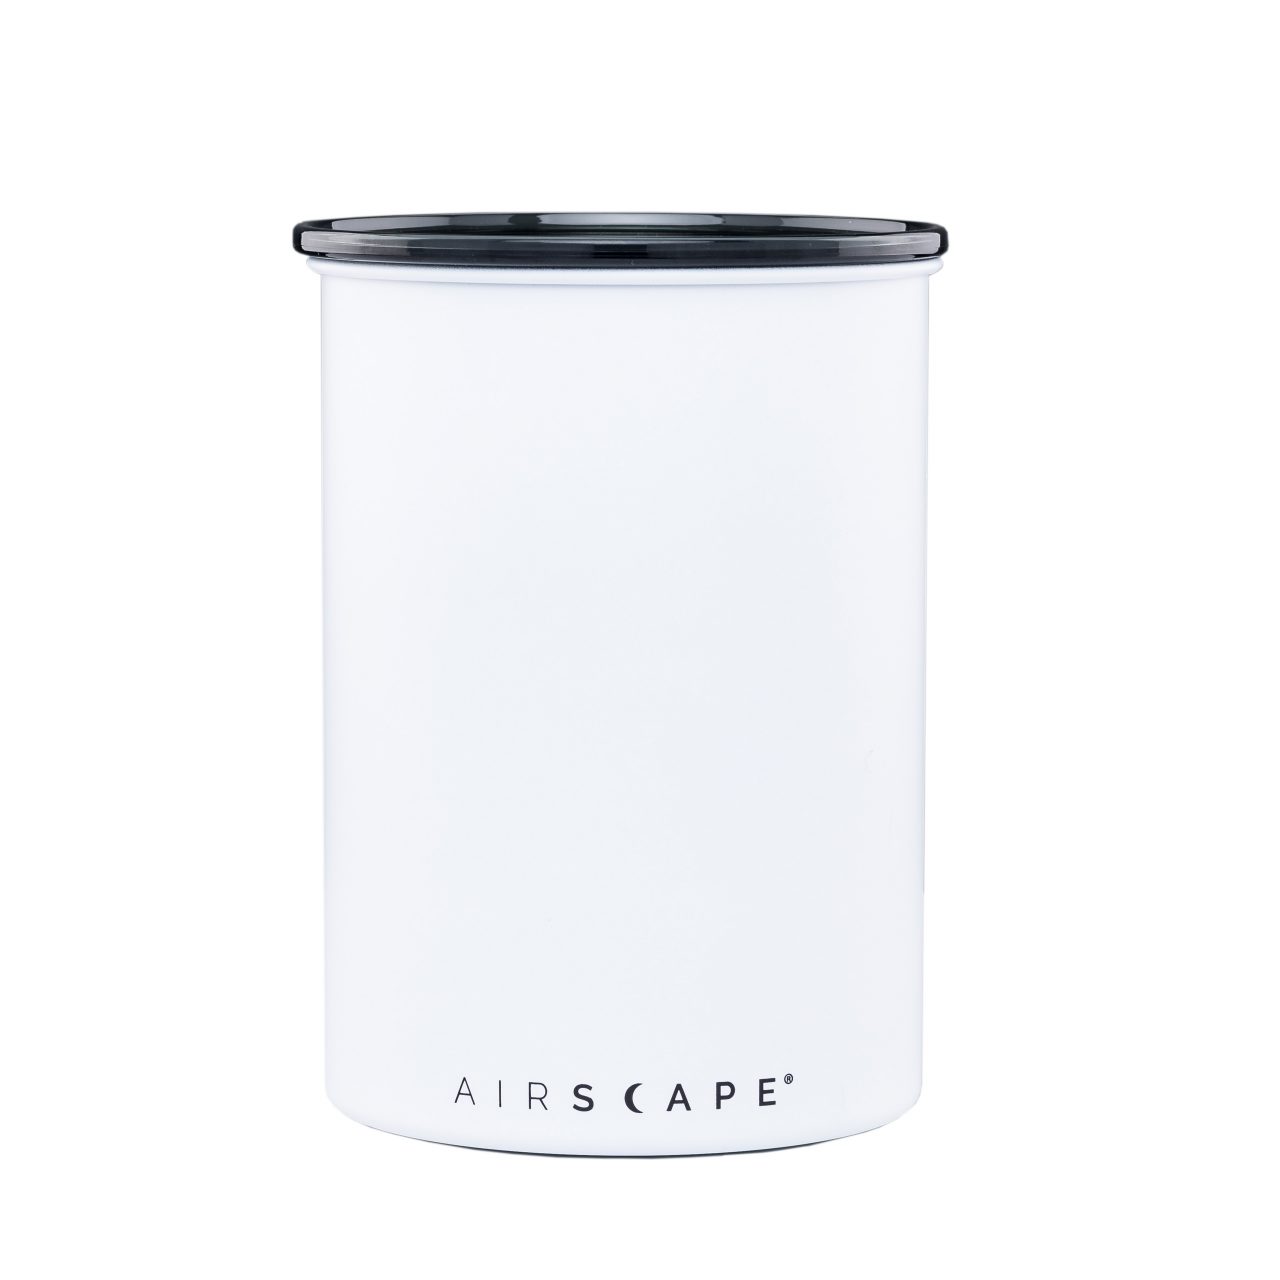 https://planetarydesign.com/wp-content/uploads/2022/07/Airscape_Stainless_coffee-canister_Matte_White_AS2007_01-1280x1280.jpg